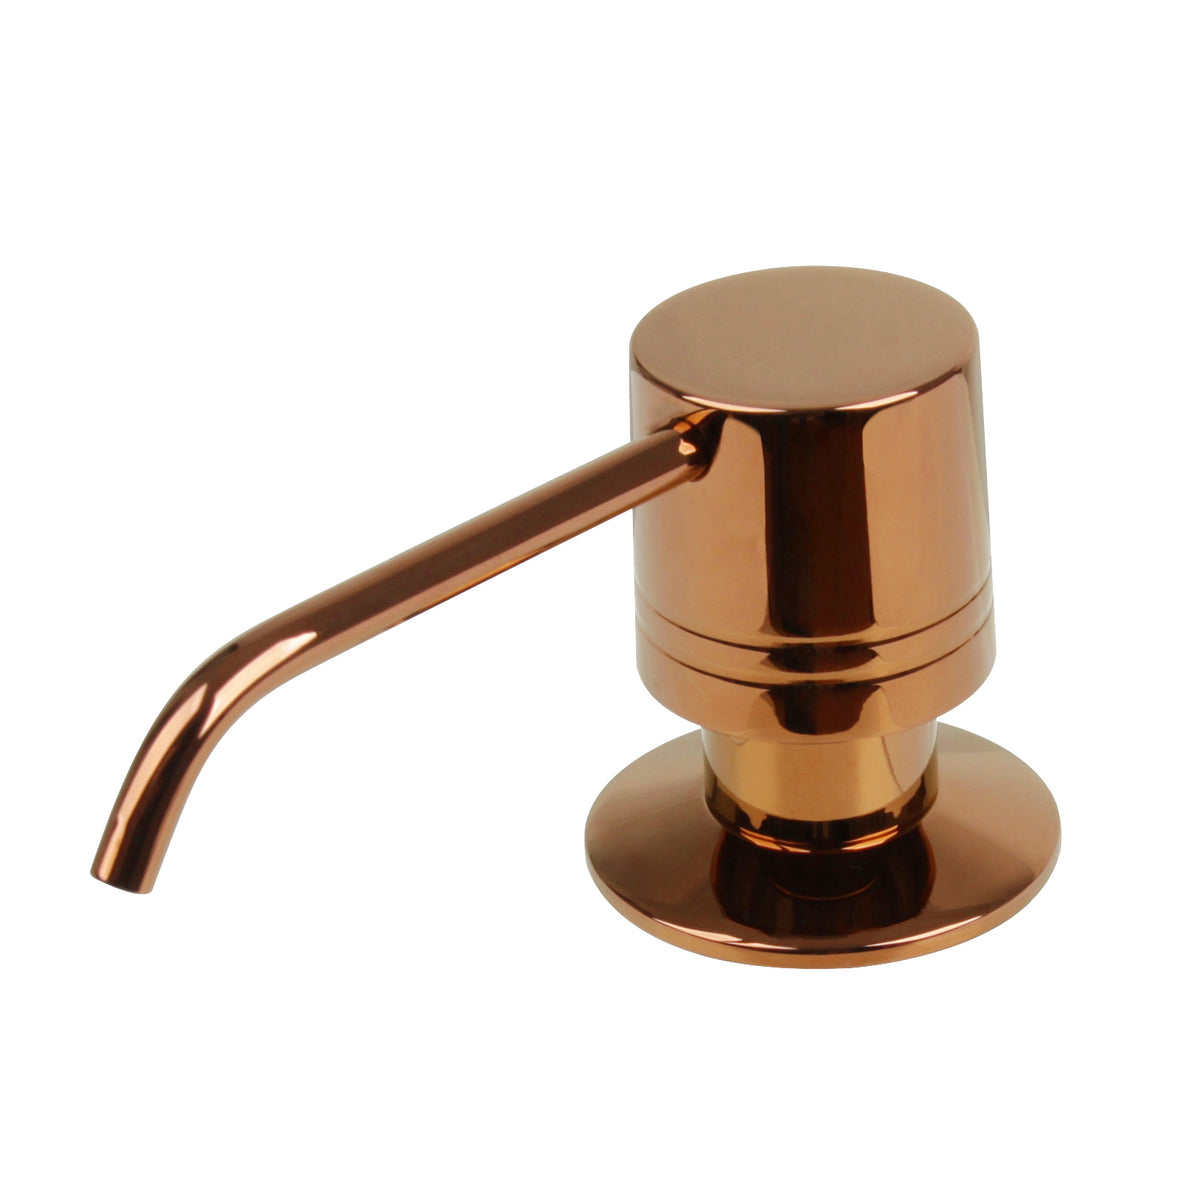 Built in Brushed Rose Gold Soap Dispenser Refill from Top with 17 OZ Bottle - AK81002RG